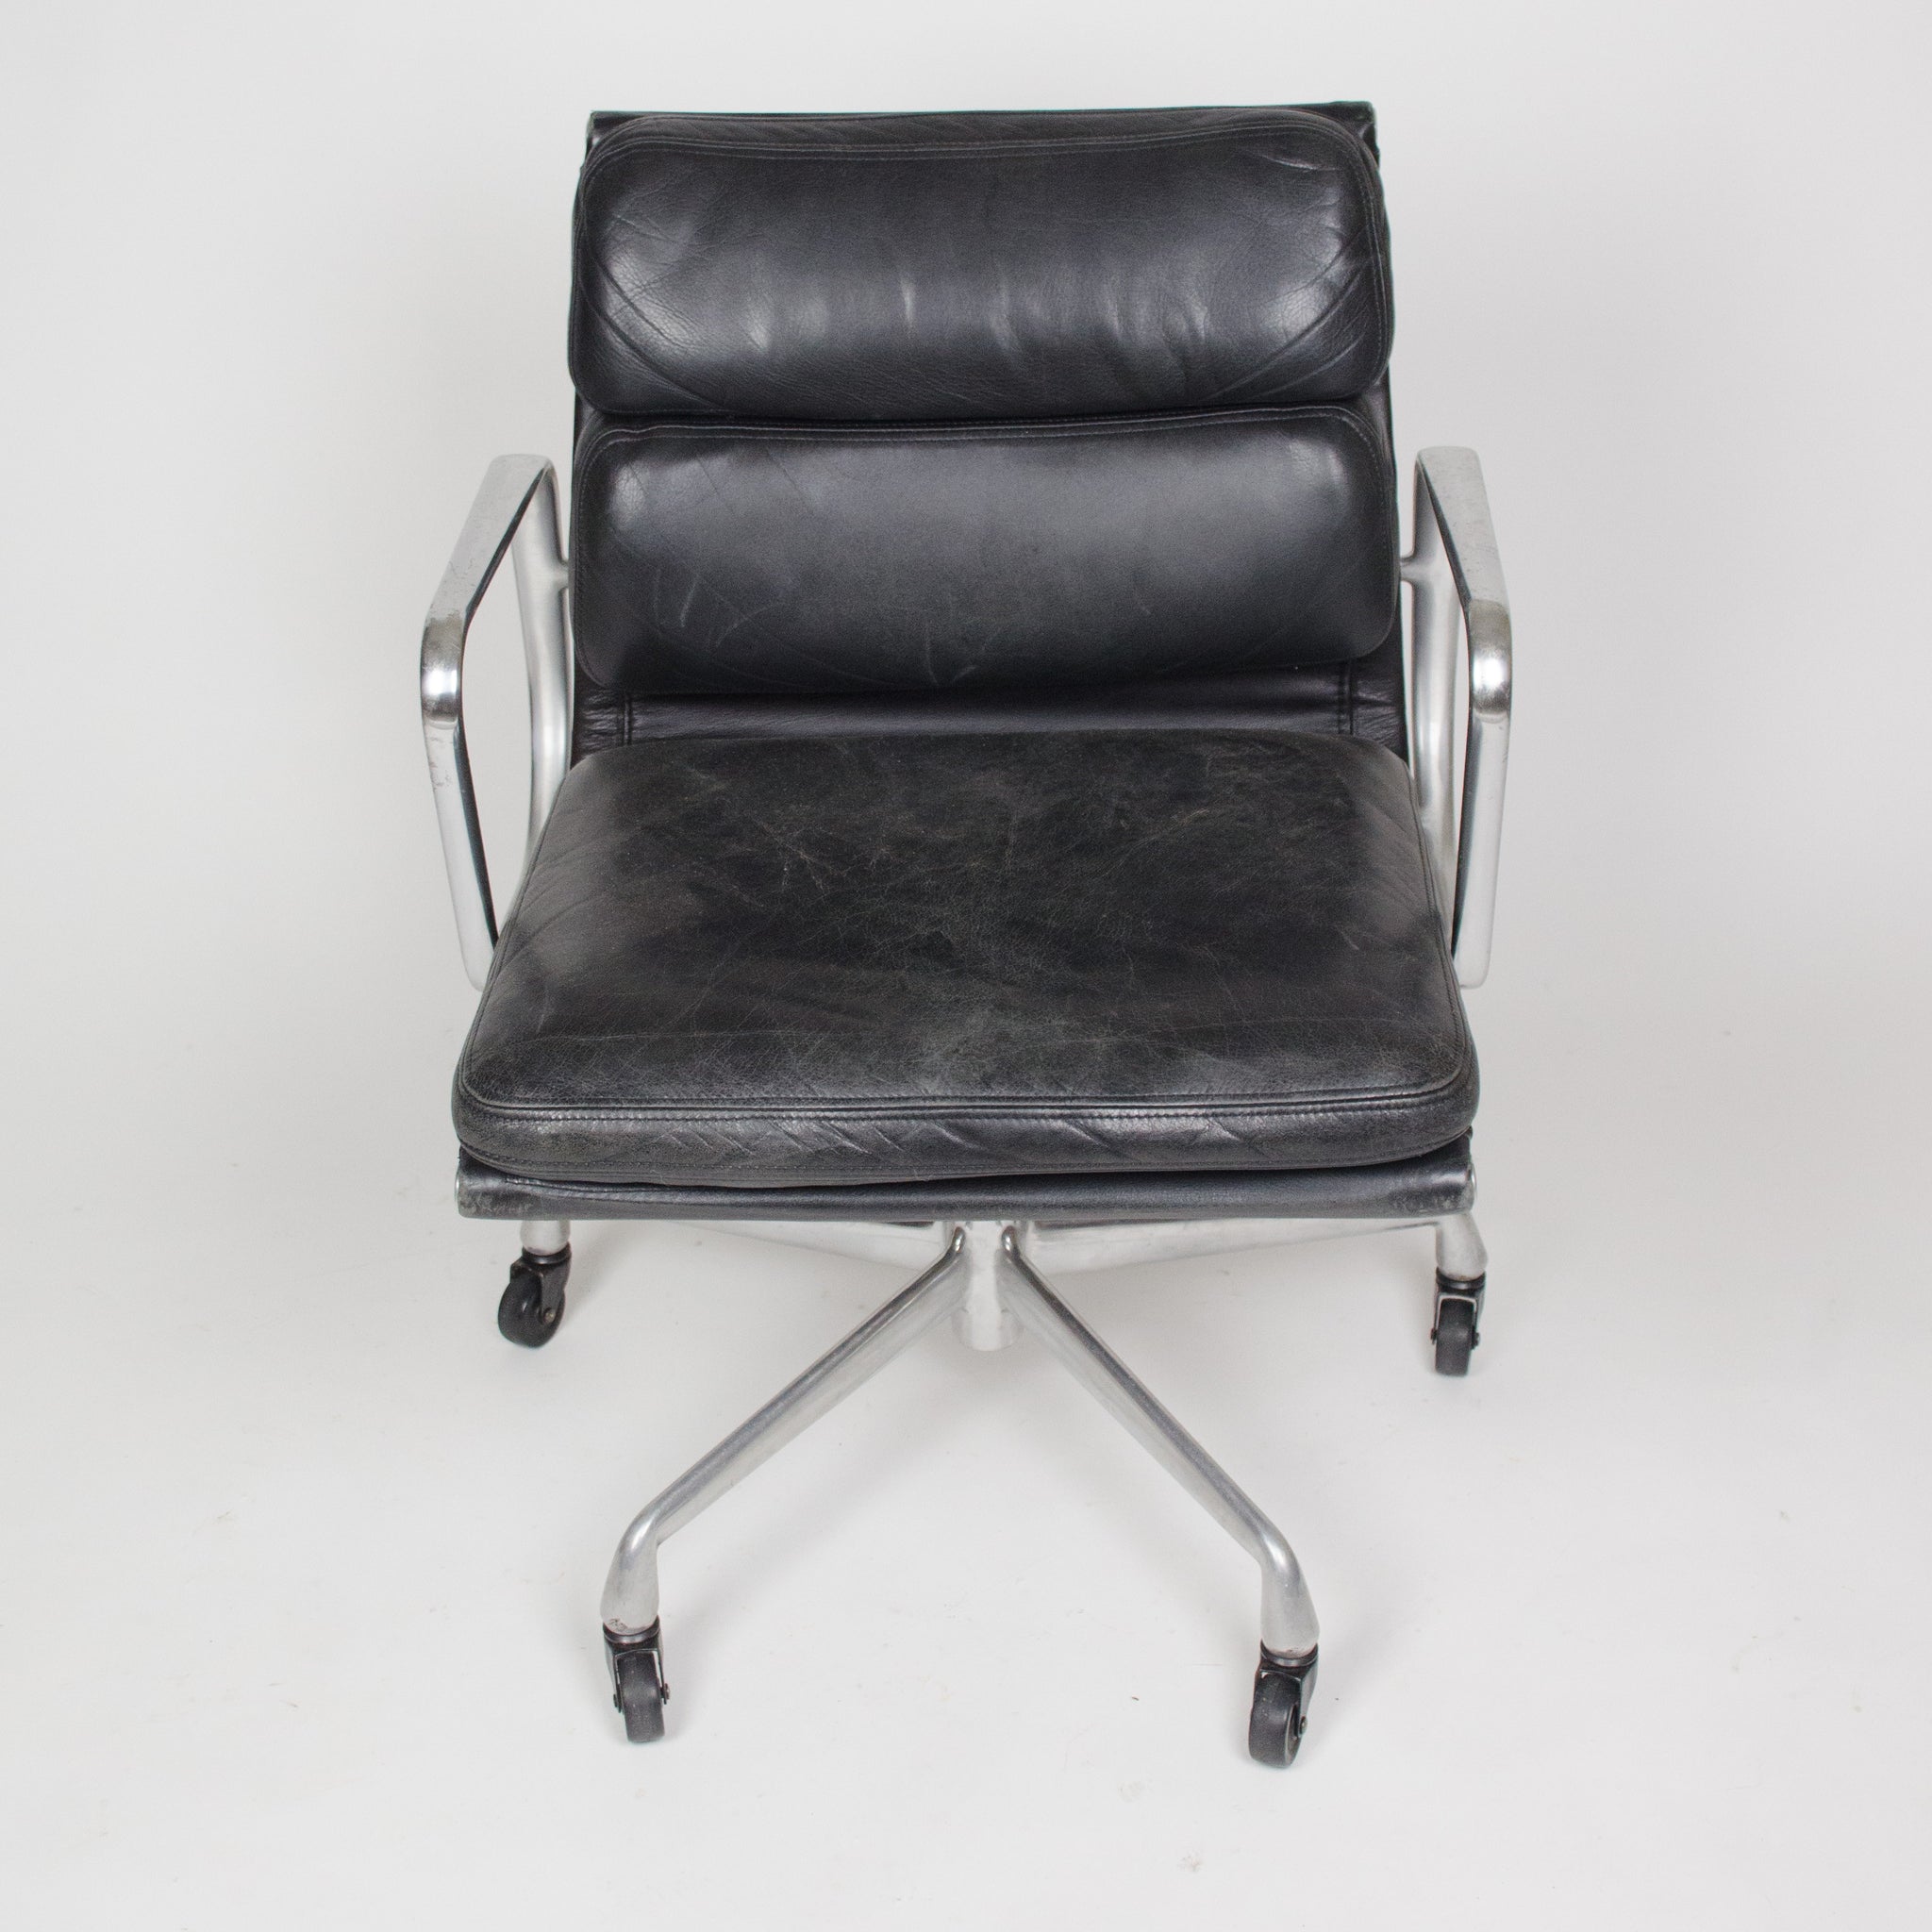 SOLD Eames Herman Miller Vintage Leather Low Soft Pad Aluminum Desk Chairs